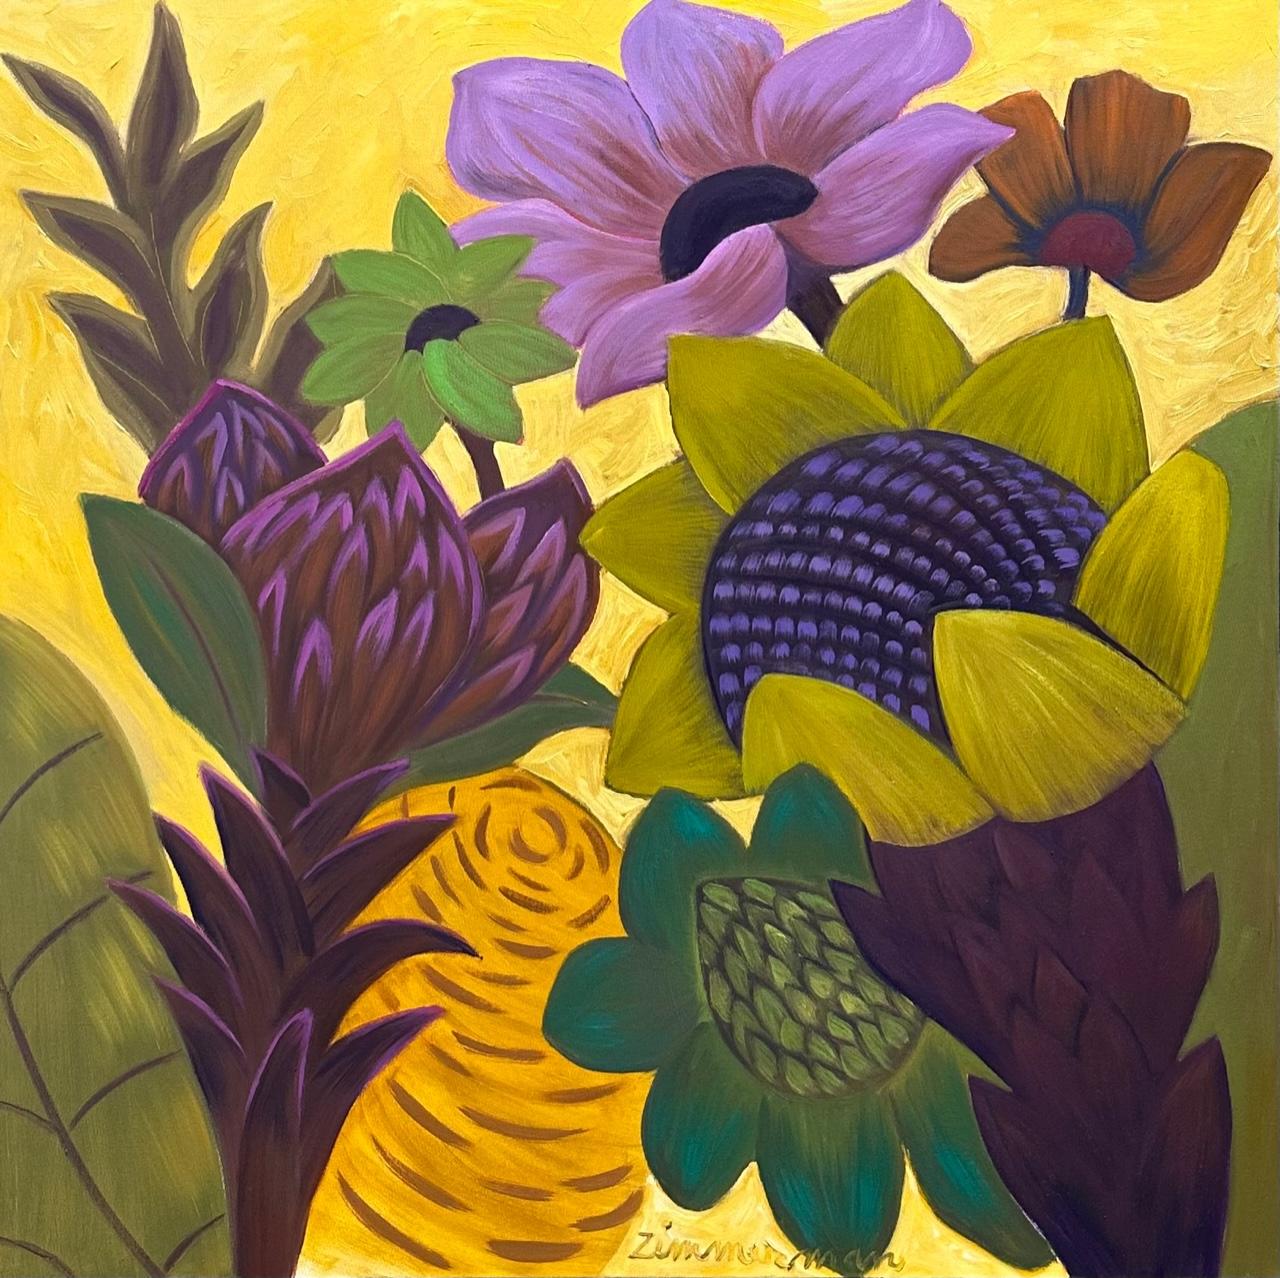 Floral Serenade - Flower painting by Marc Zimmerman - Still Life Art

This masterpiece is exhibited in the Zimmerman Gallery, Carmel CA.

ABOUT THE ARTIST
Marc Zimmerman is a visionary artist whose creations embody a captivating blend of playfulness